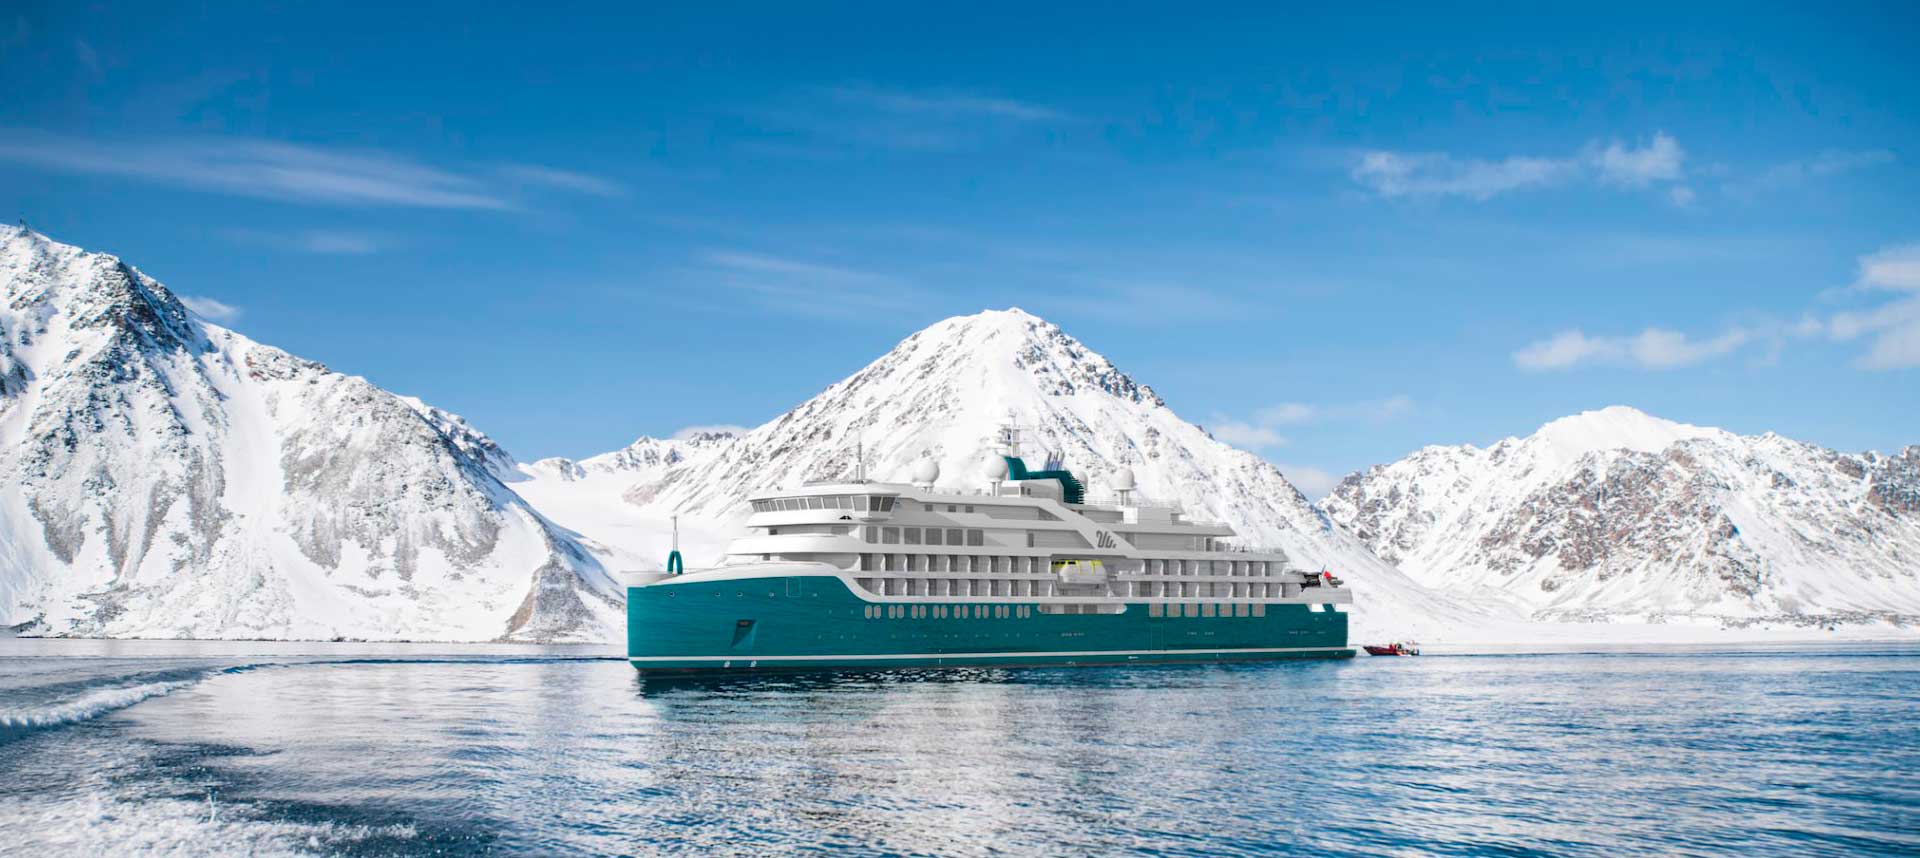 Minerva is an electrically-powered expedition vessel designed for the ultimate traveler experience with all the necessary amenities. She is the first of three vessels that Helskinki Shipyard will build for Swan Hellenic, a British operator focused on expedition vessels.